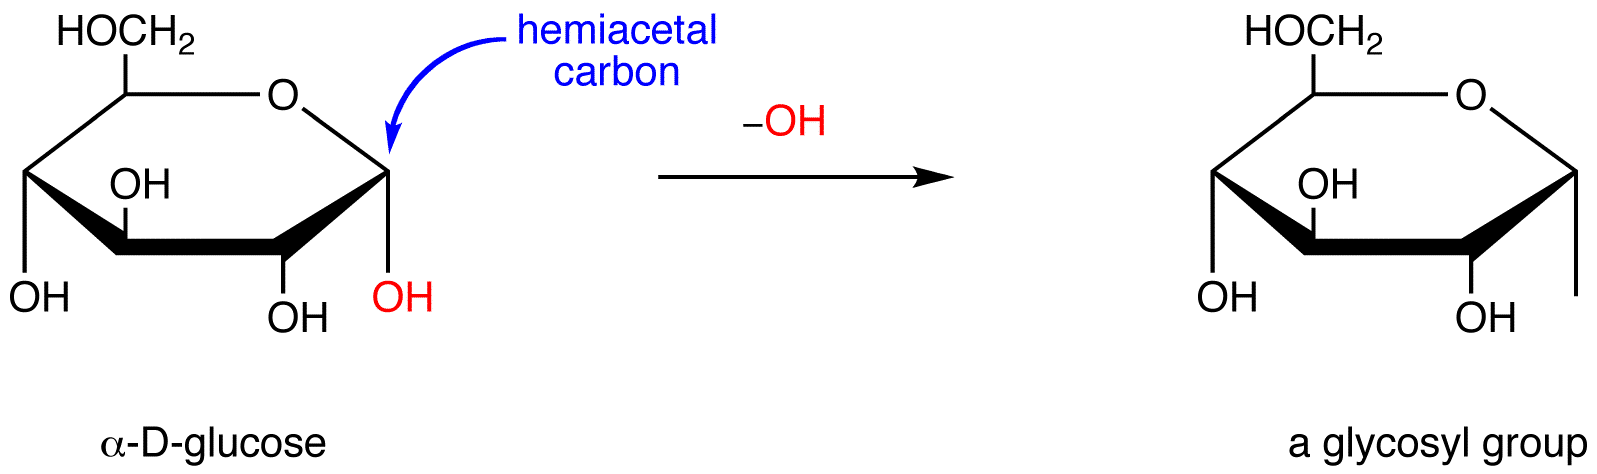 glycosylgroup1.png